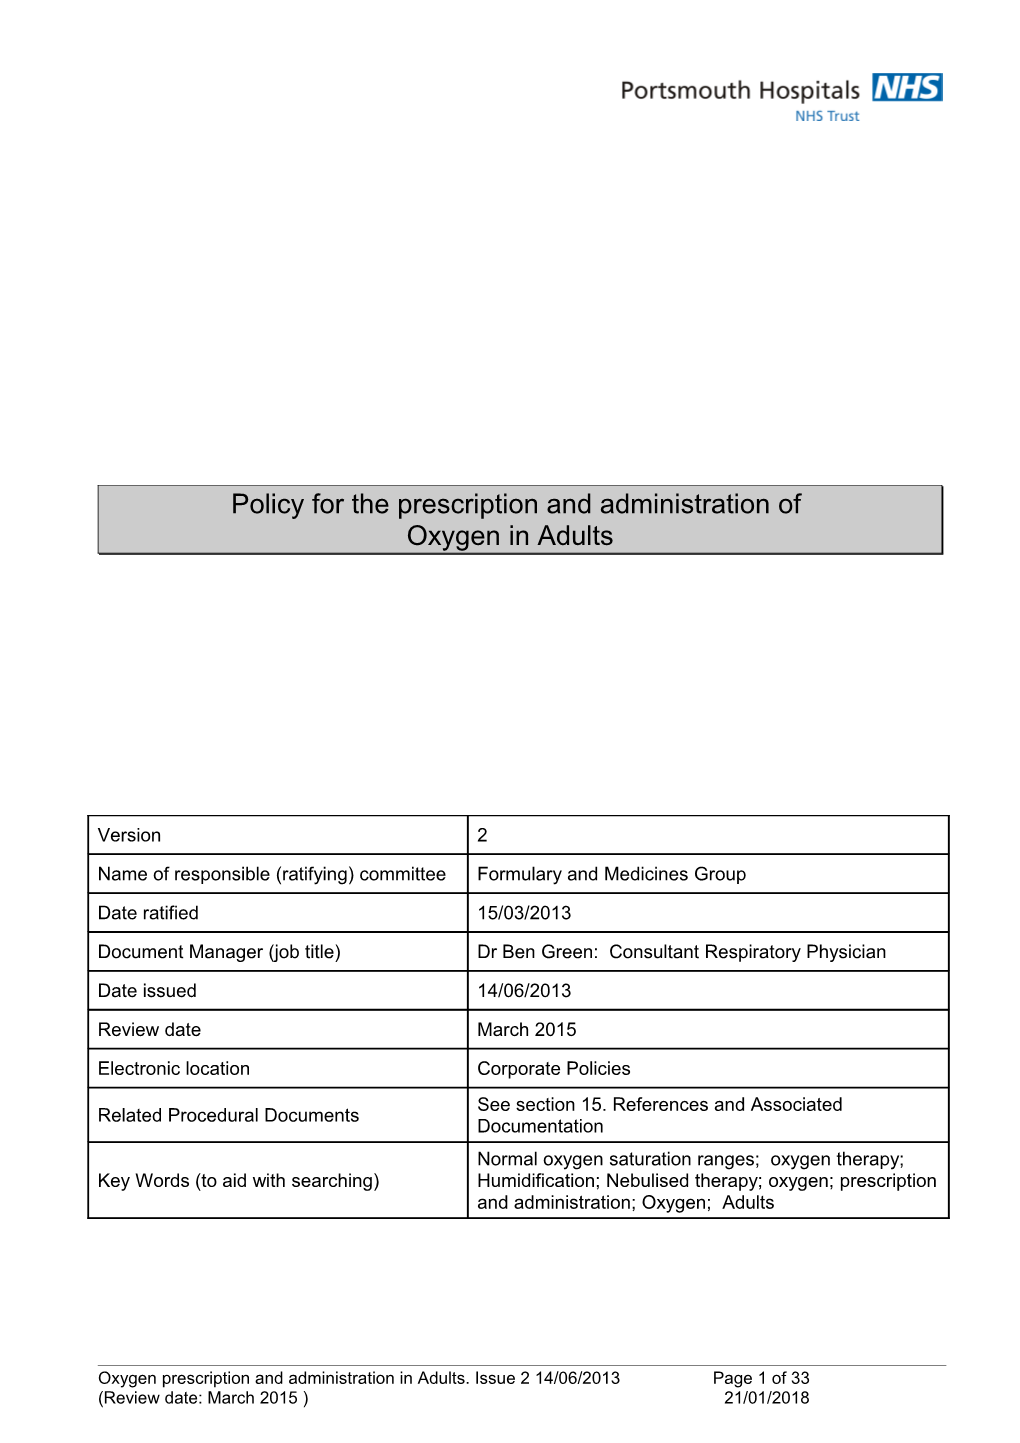 Oxygen Prescription and Administration in Adults